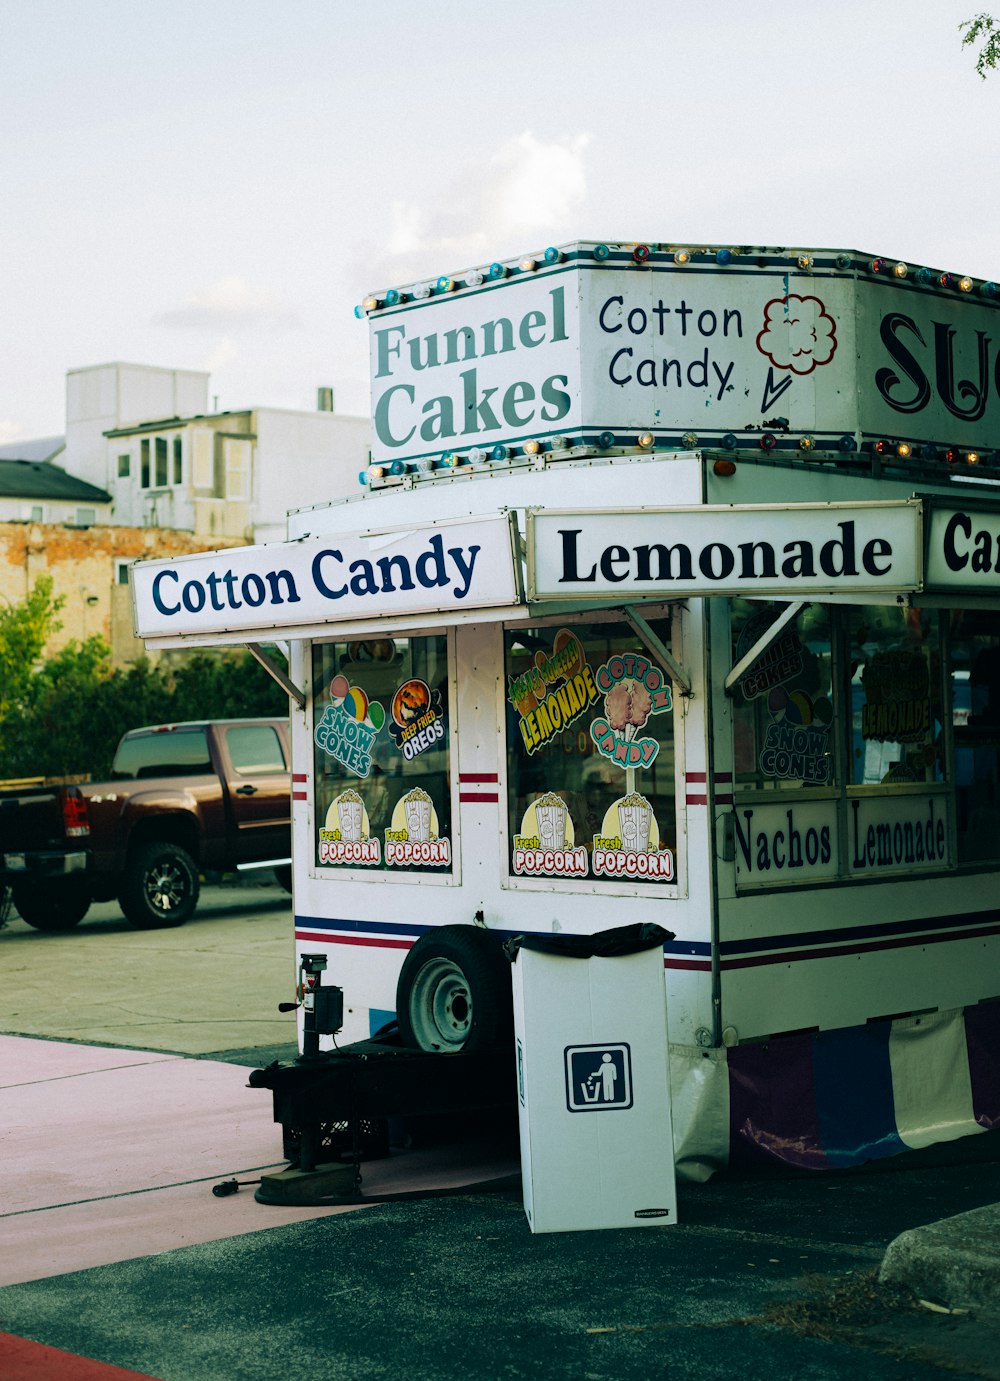 a street vendor selling lemonade and cotton cakes